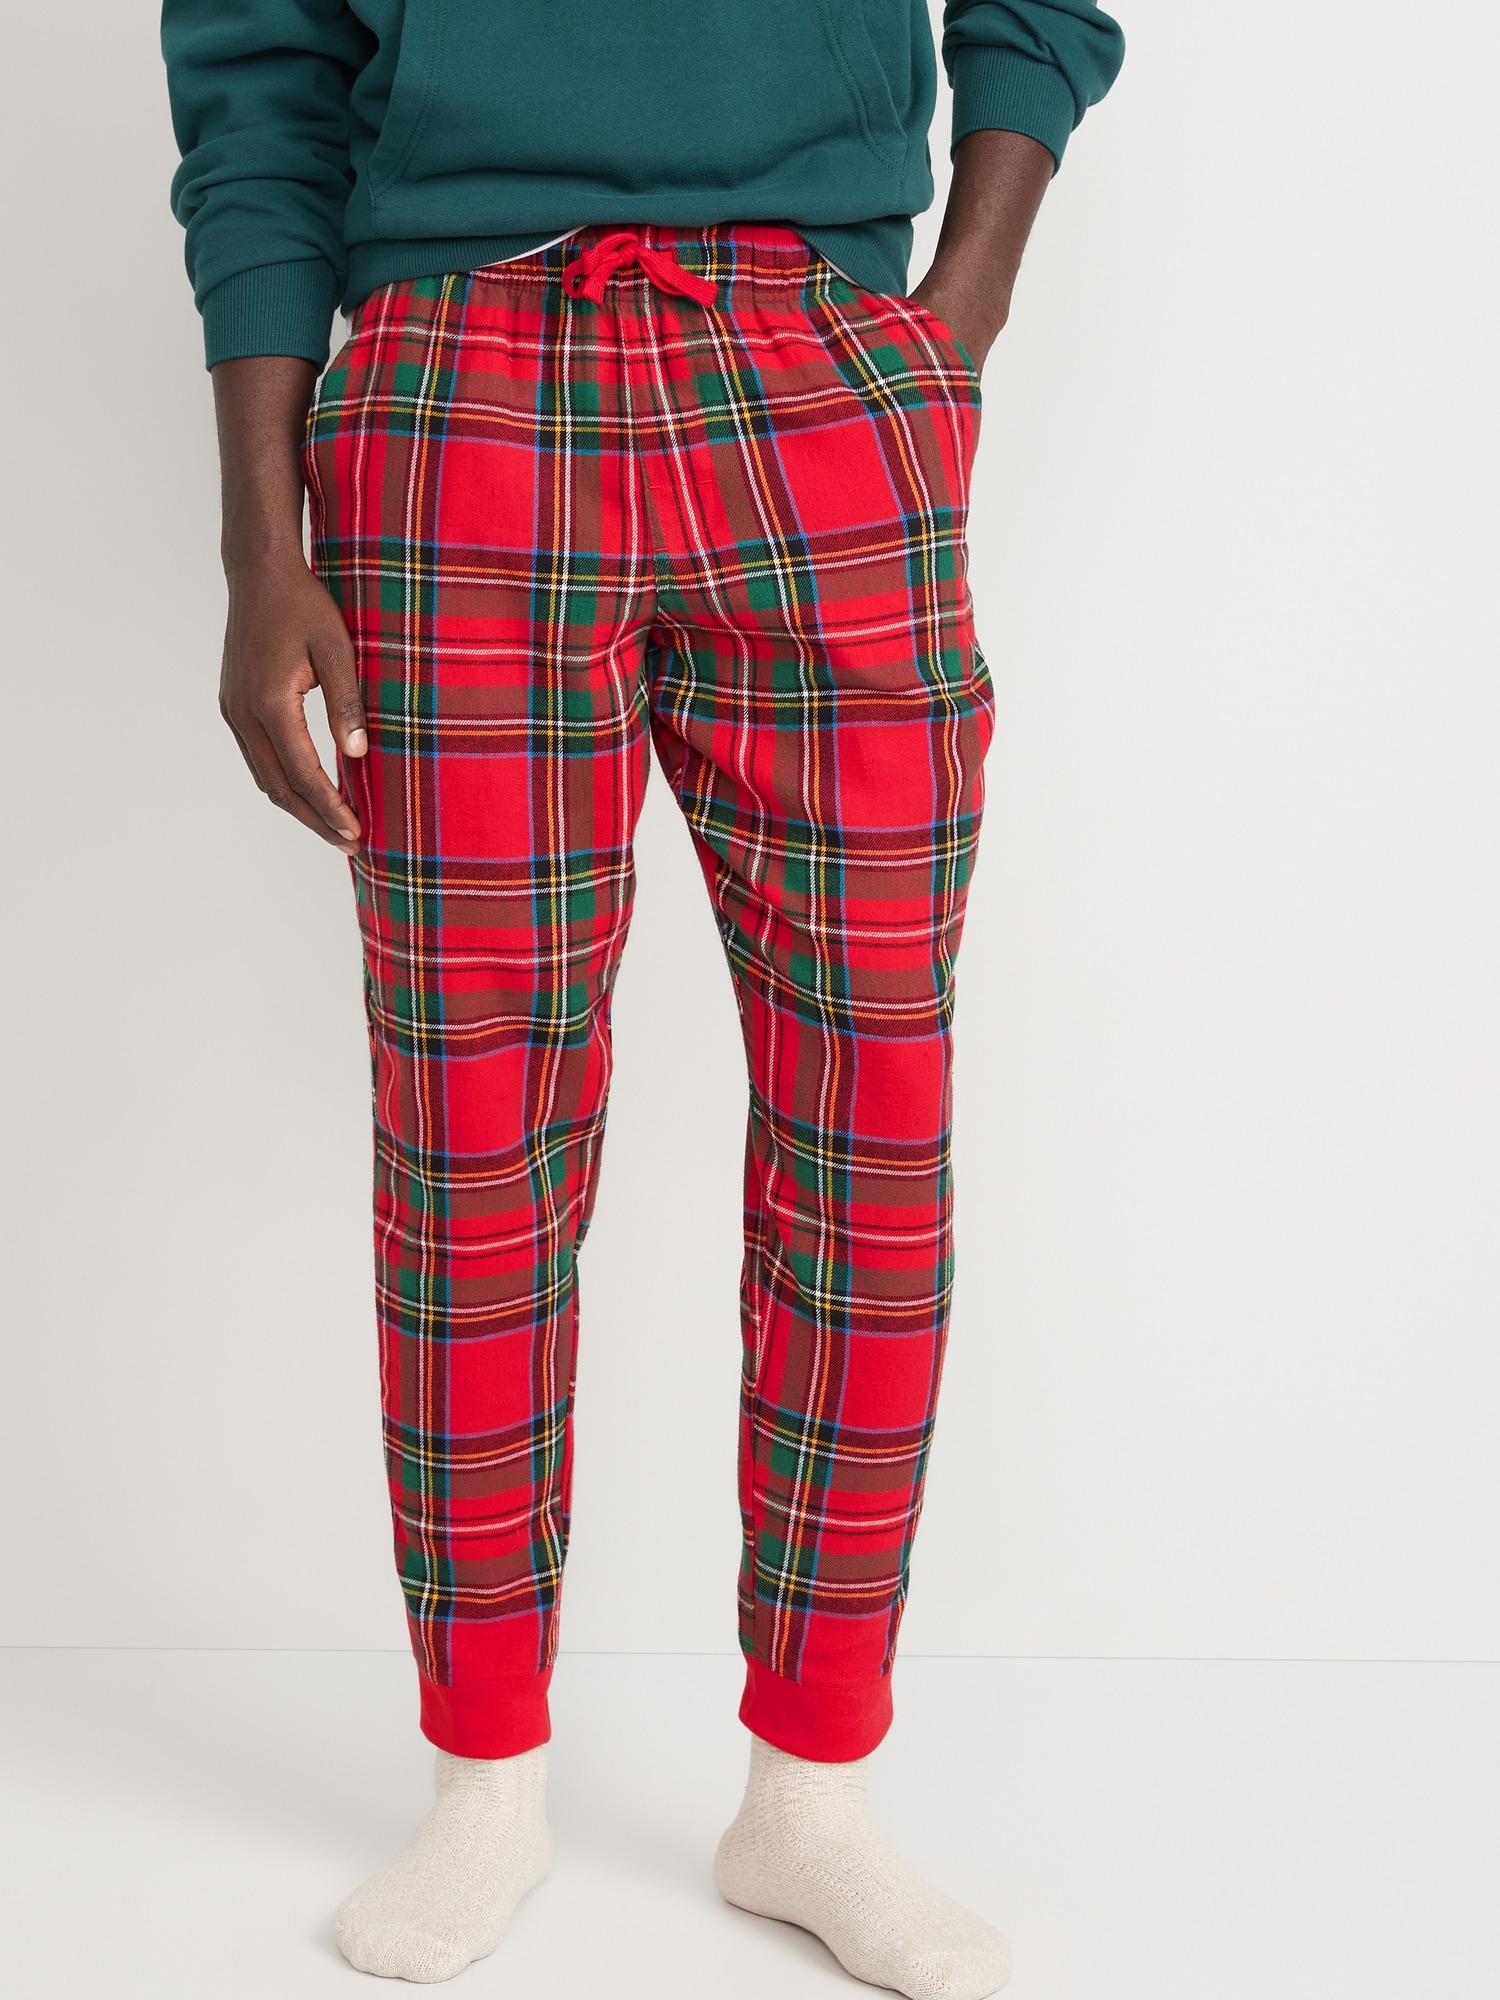 Stars Above Perfectly Cosy Plaid Flannel Jogger Pajama Pants